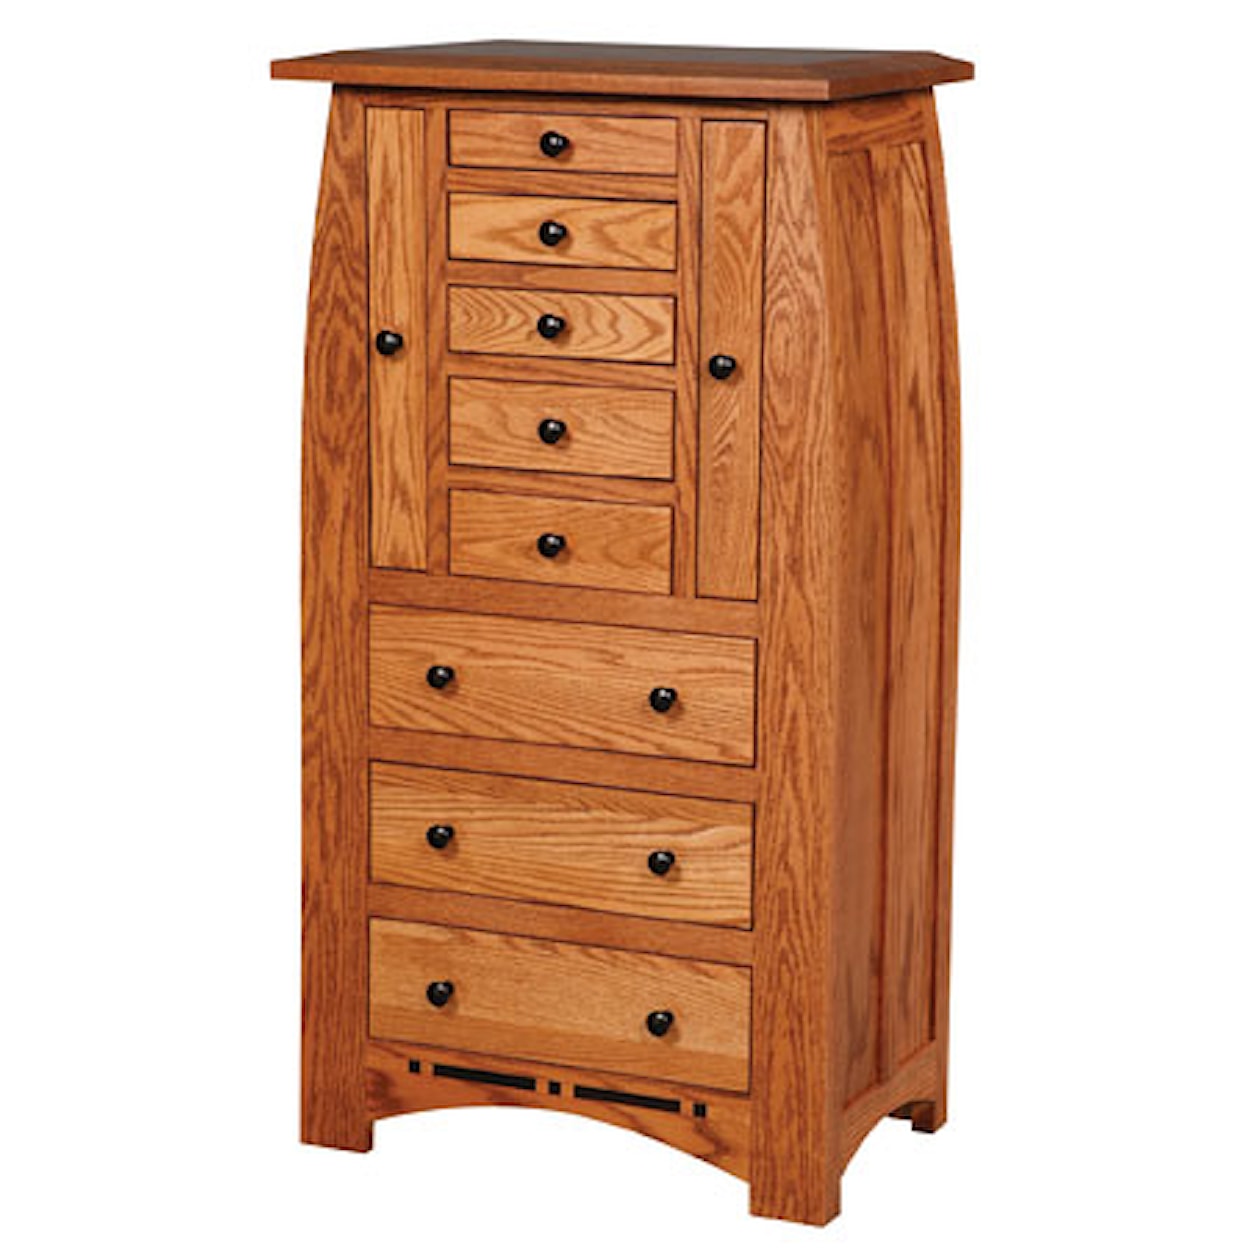 Simply Amish Aspen Jewelry Armoire